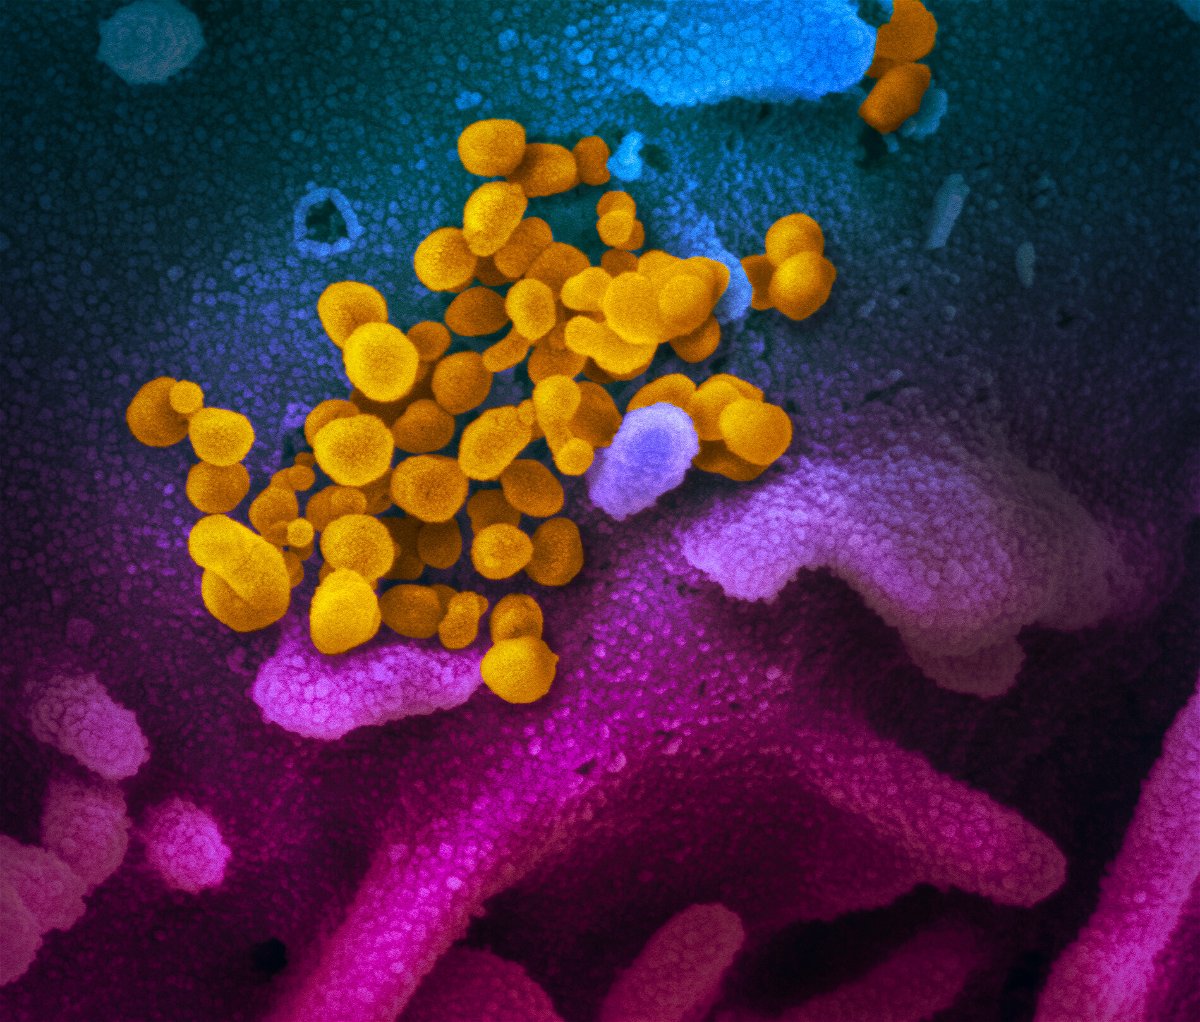 <i>NIAID-RML</i><br/>This scanning electron microscope image shows SARS-CoV-2 (yellow)—also known as 2019-nCoV